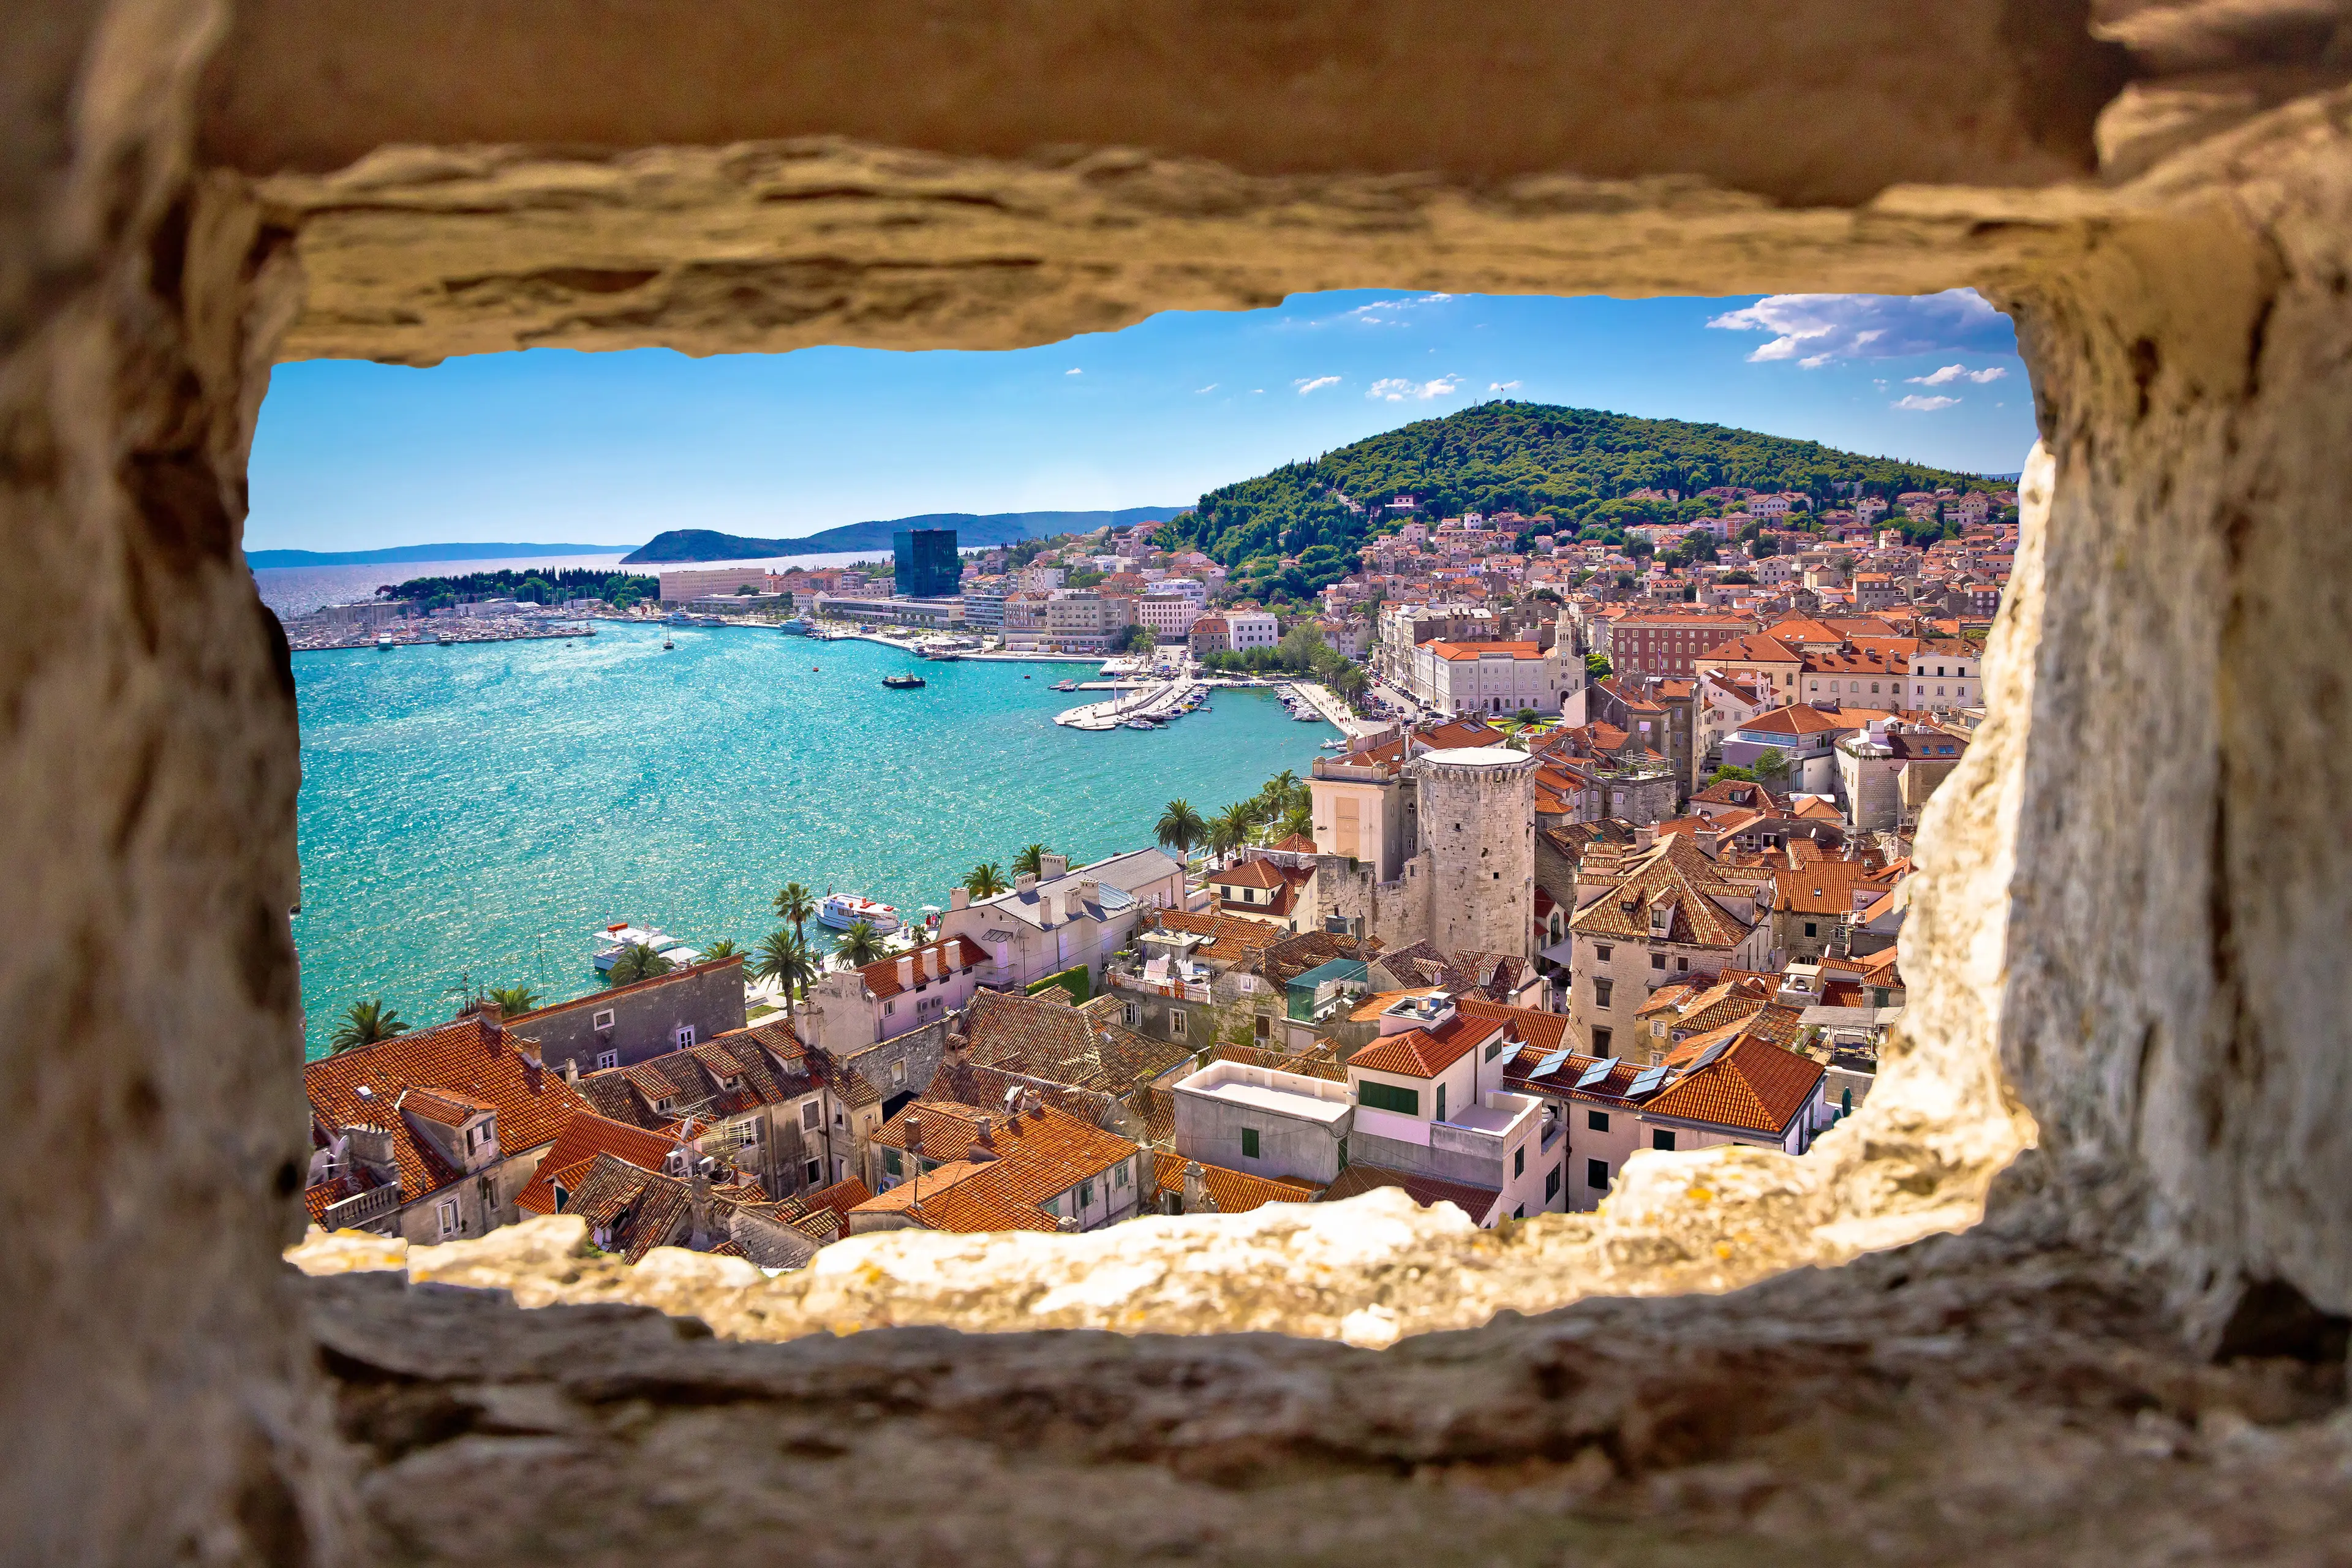 View of the bay from a window carved on stone